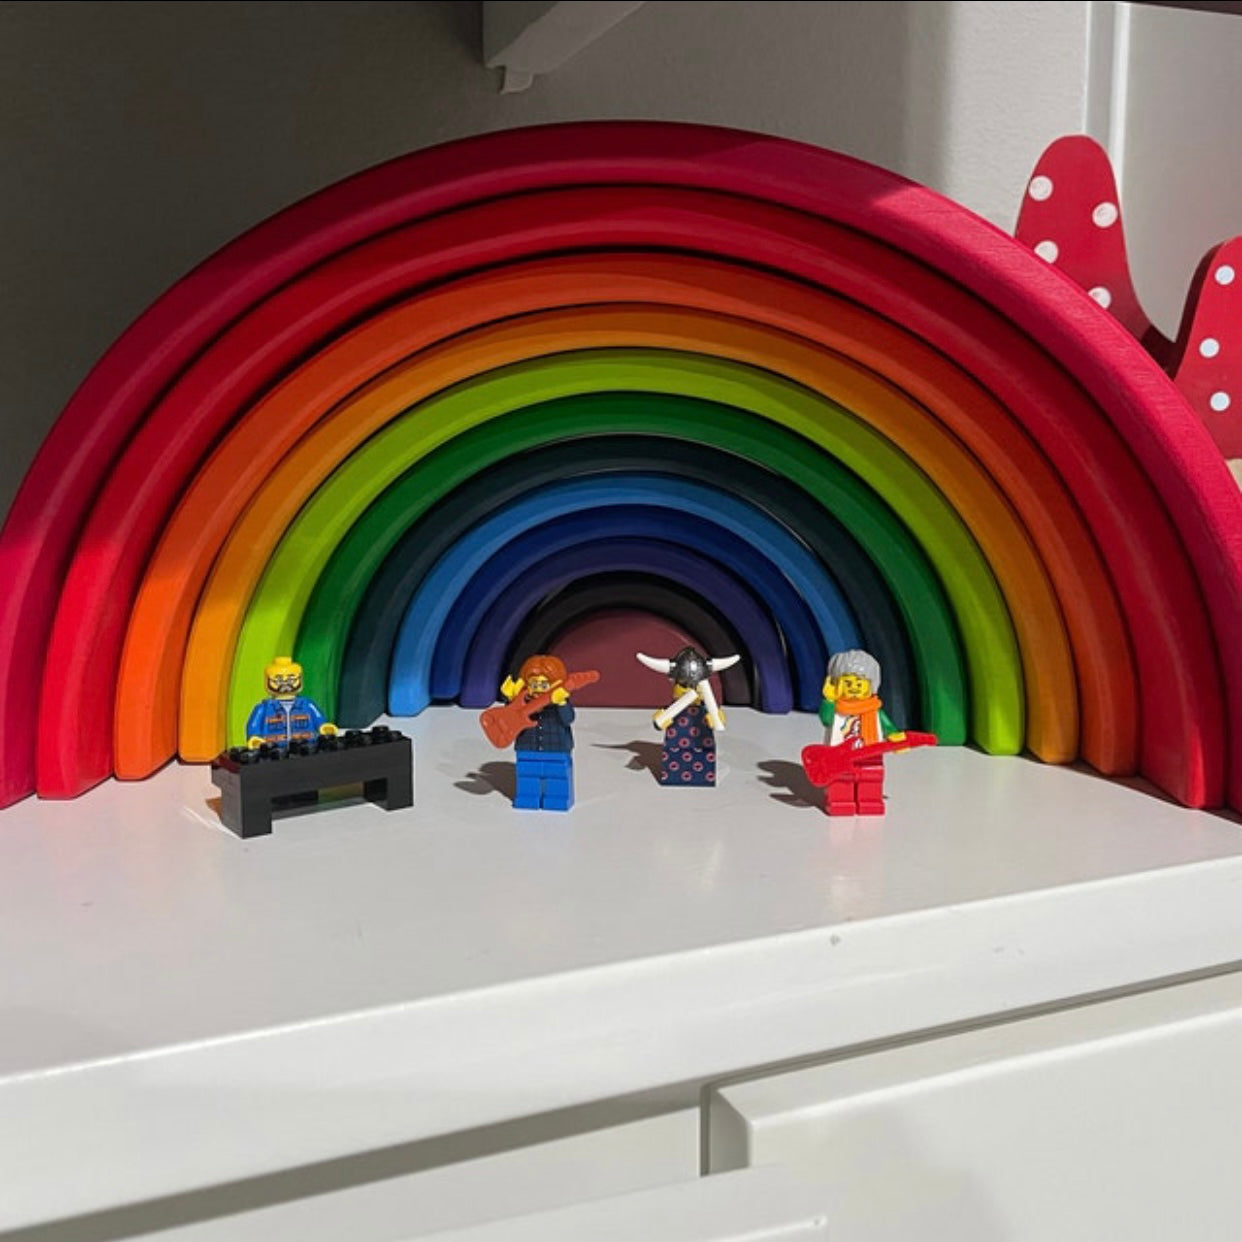 Art Supplies for Kids and Adults, 7 Colors in 1 Wooden Rainbow